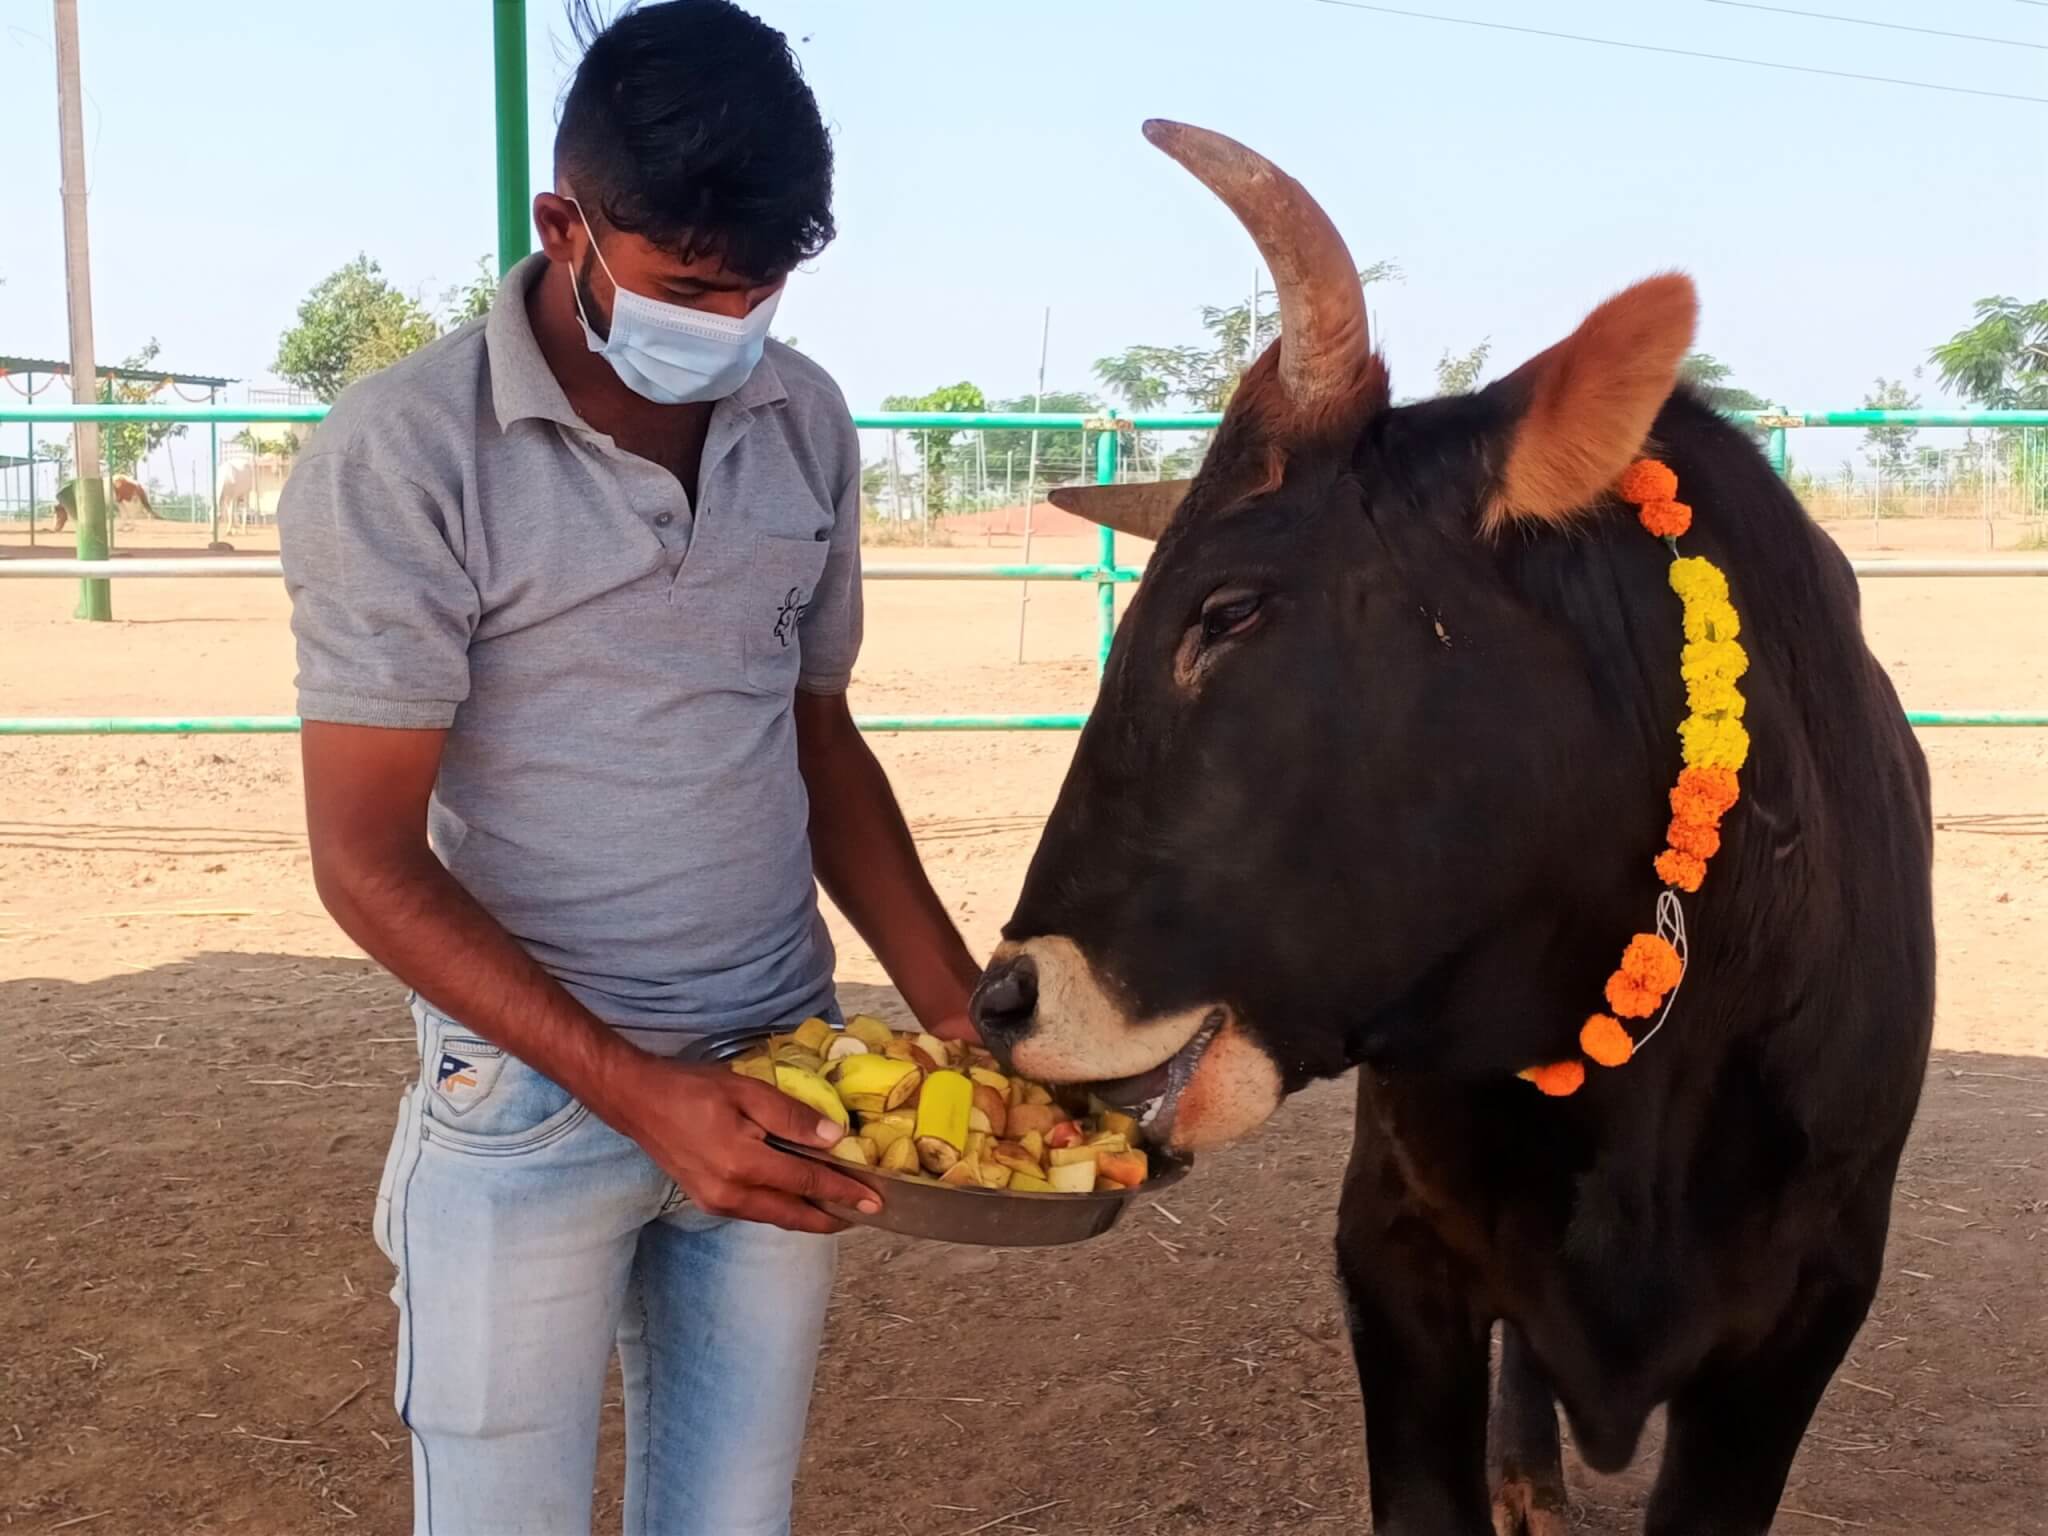 Mahadev, who was rescued as a tiny calf, is now grown and happy to gobble up a big plate of fresh fruit.